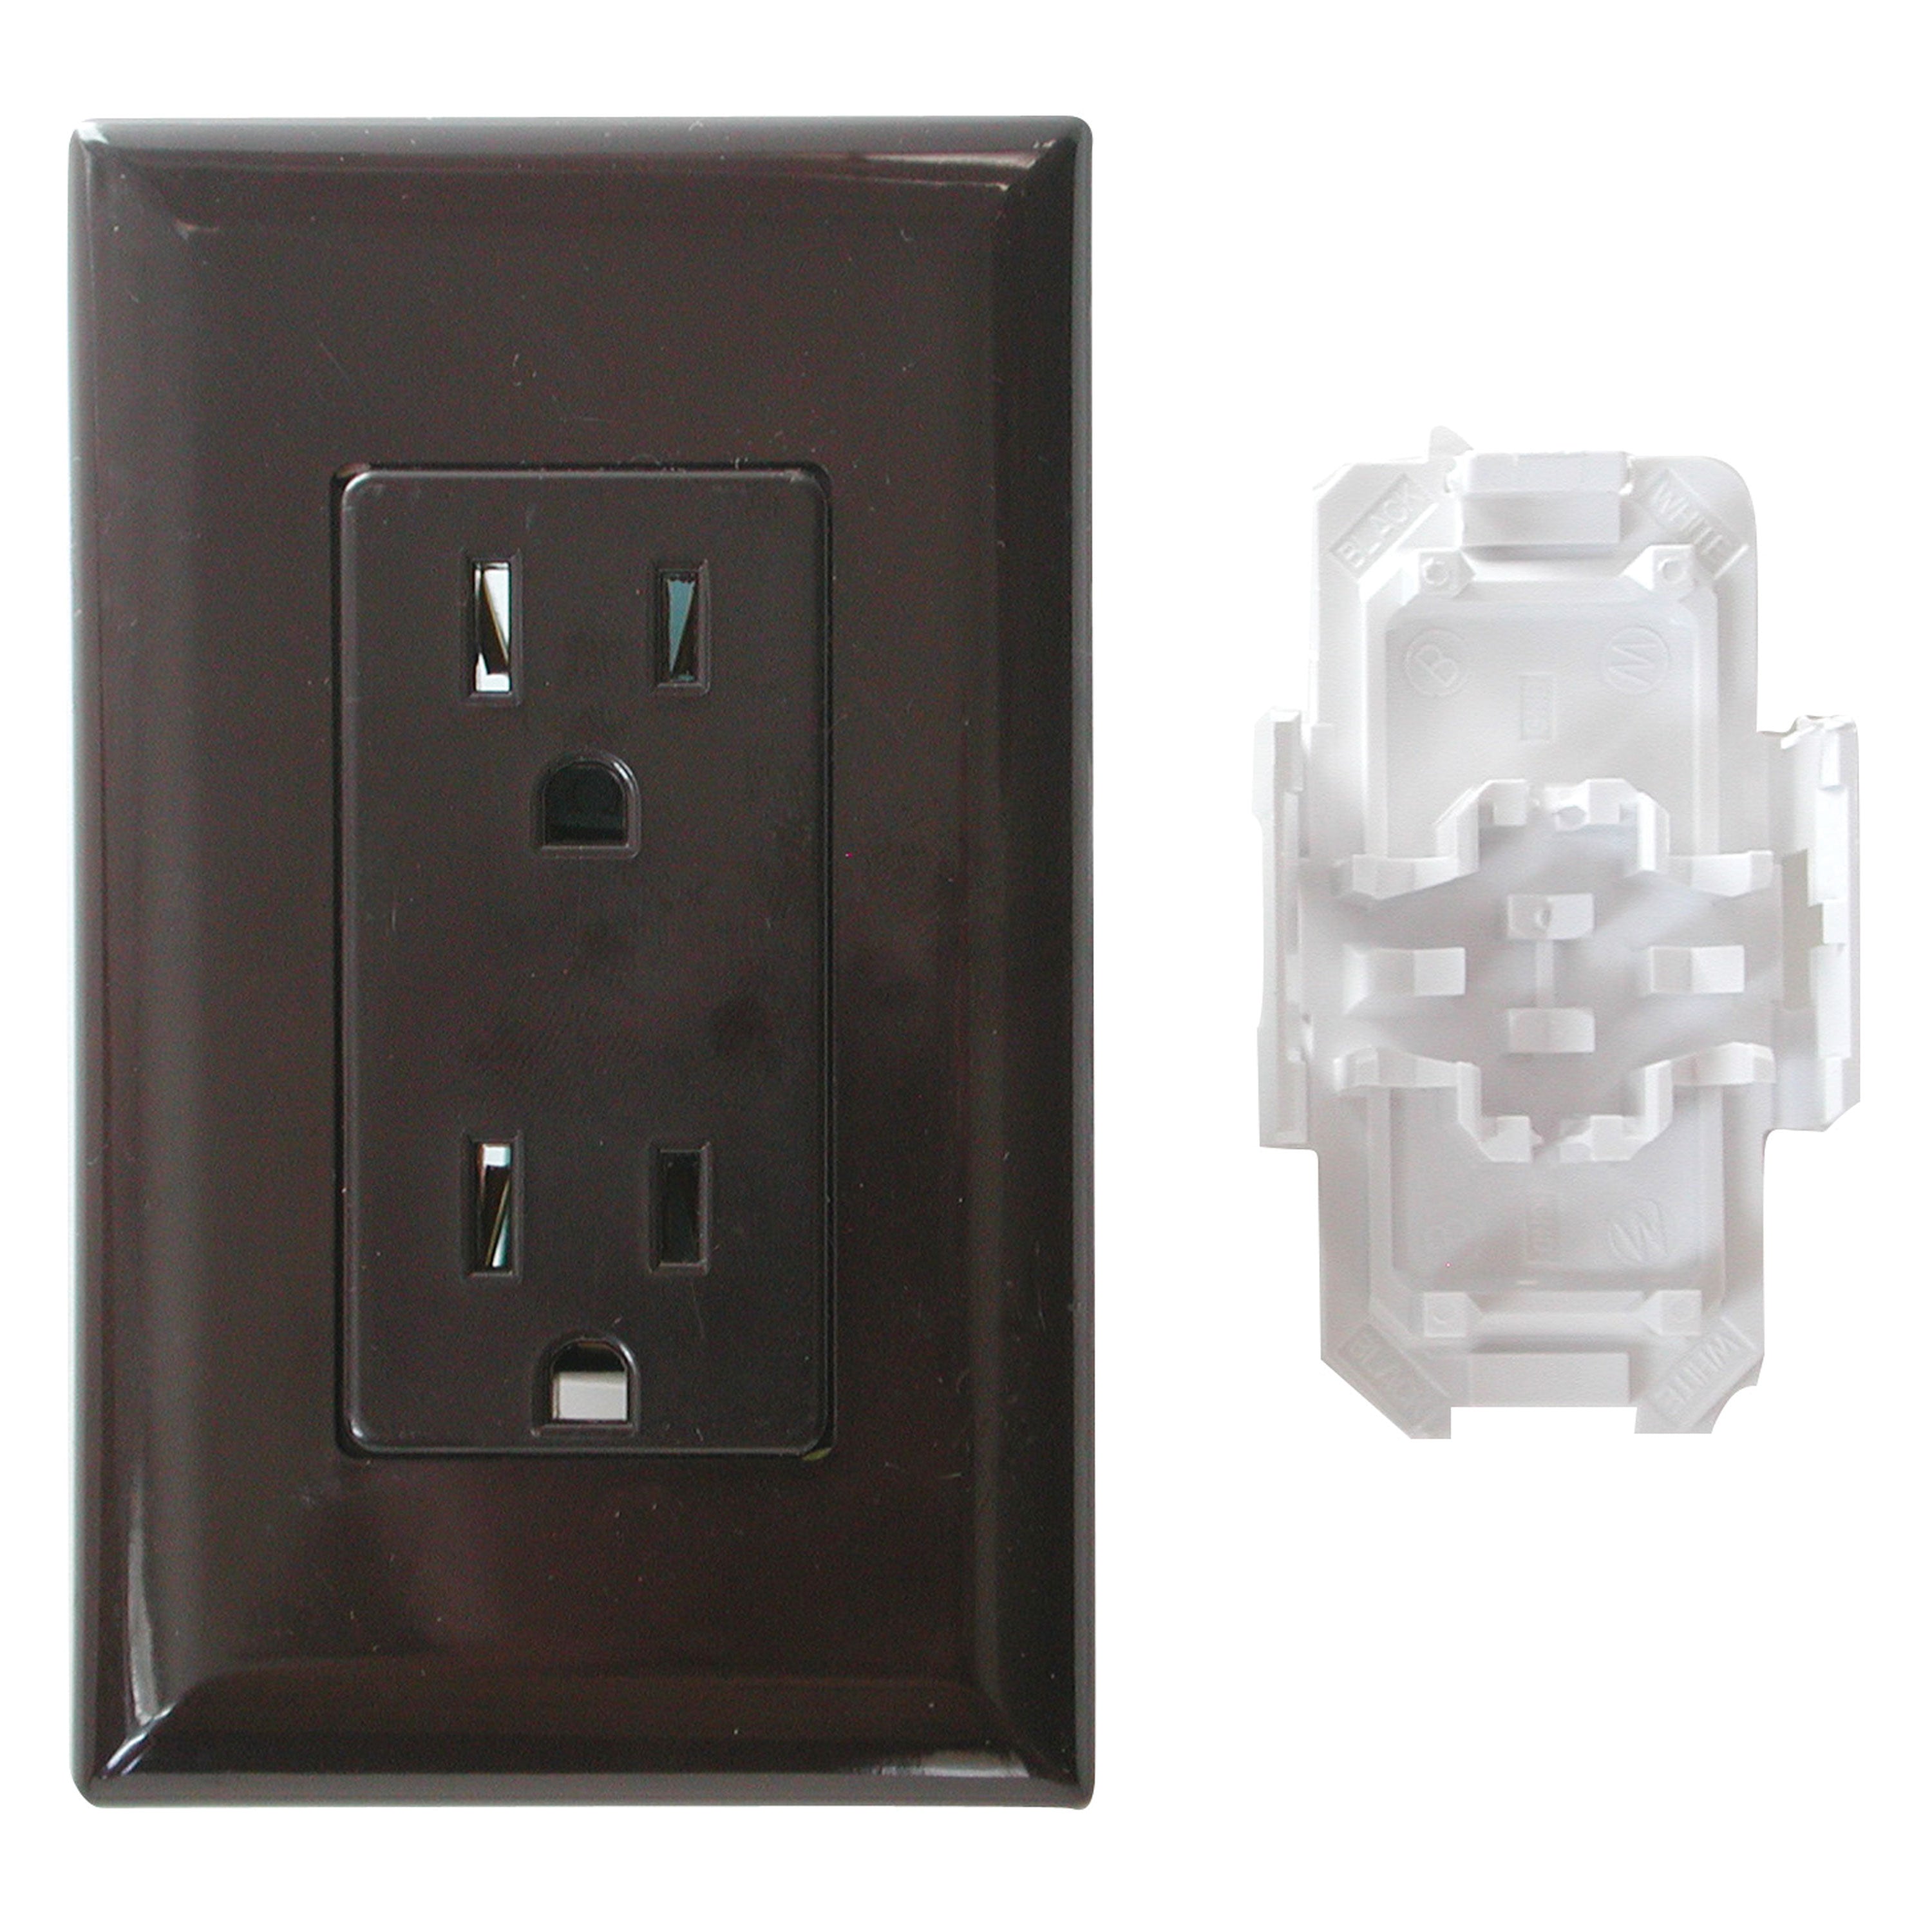 Diamond Group by Valterra DG15BRVP Decor Receptacle with Cover - 15A, 125V, Brown